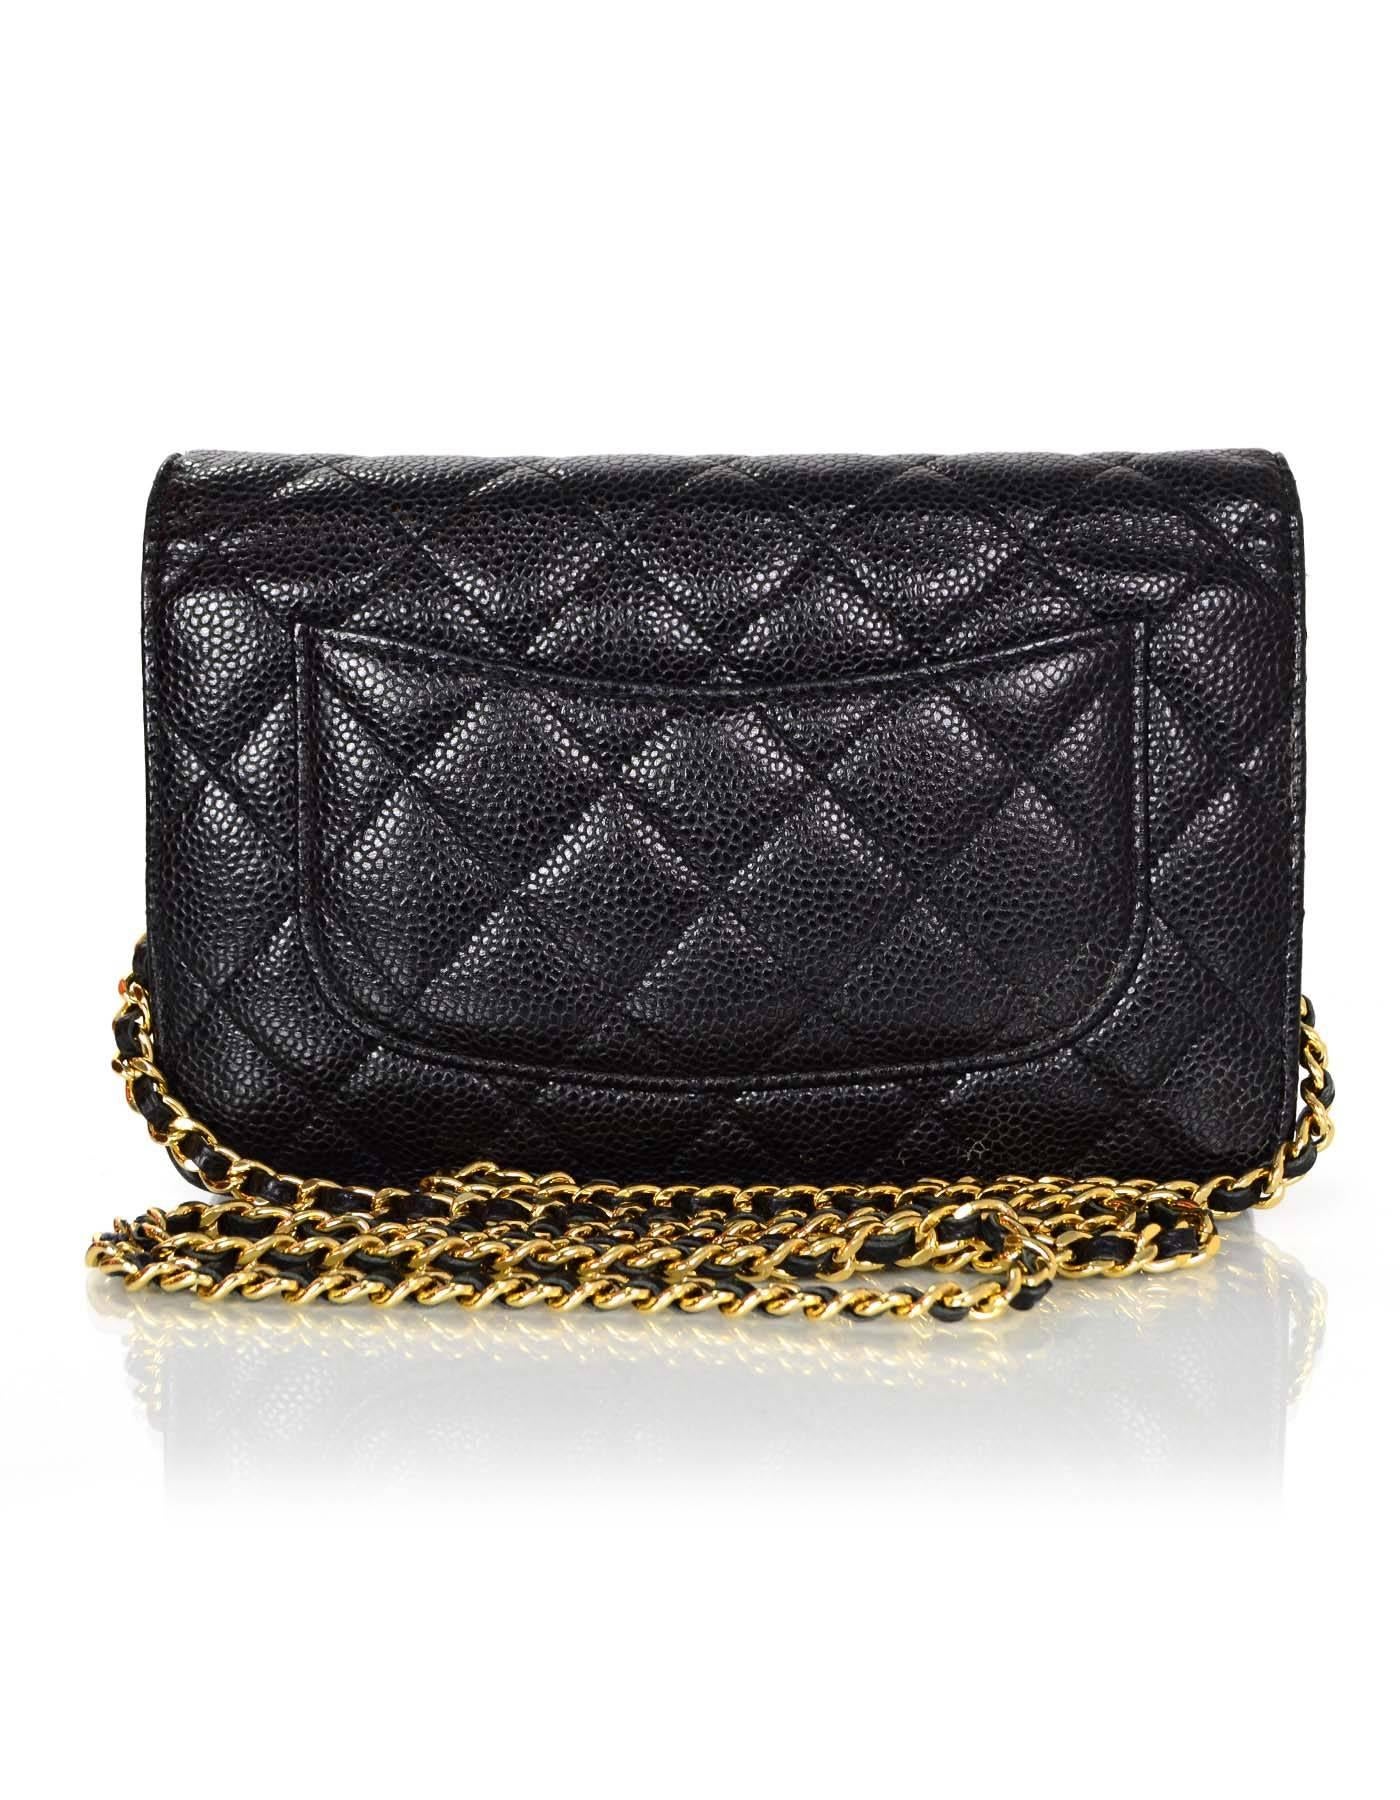 100% Authentic Chanel Black Caviar Leather WOC with Goldtone Hardware.  This classic quilted flap bag is perfect for a night out with a wallet inside to save space.  Crossbody chain can also be tucked into bag to be worn as a clutch

Made In: